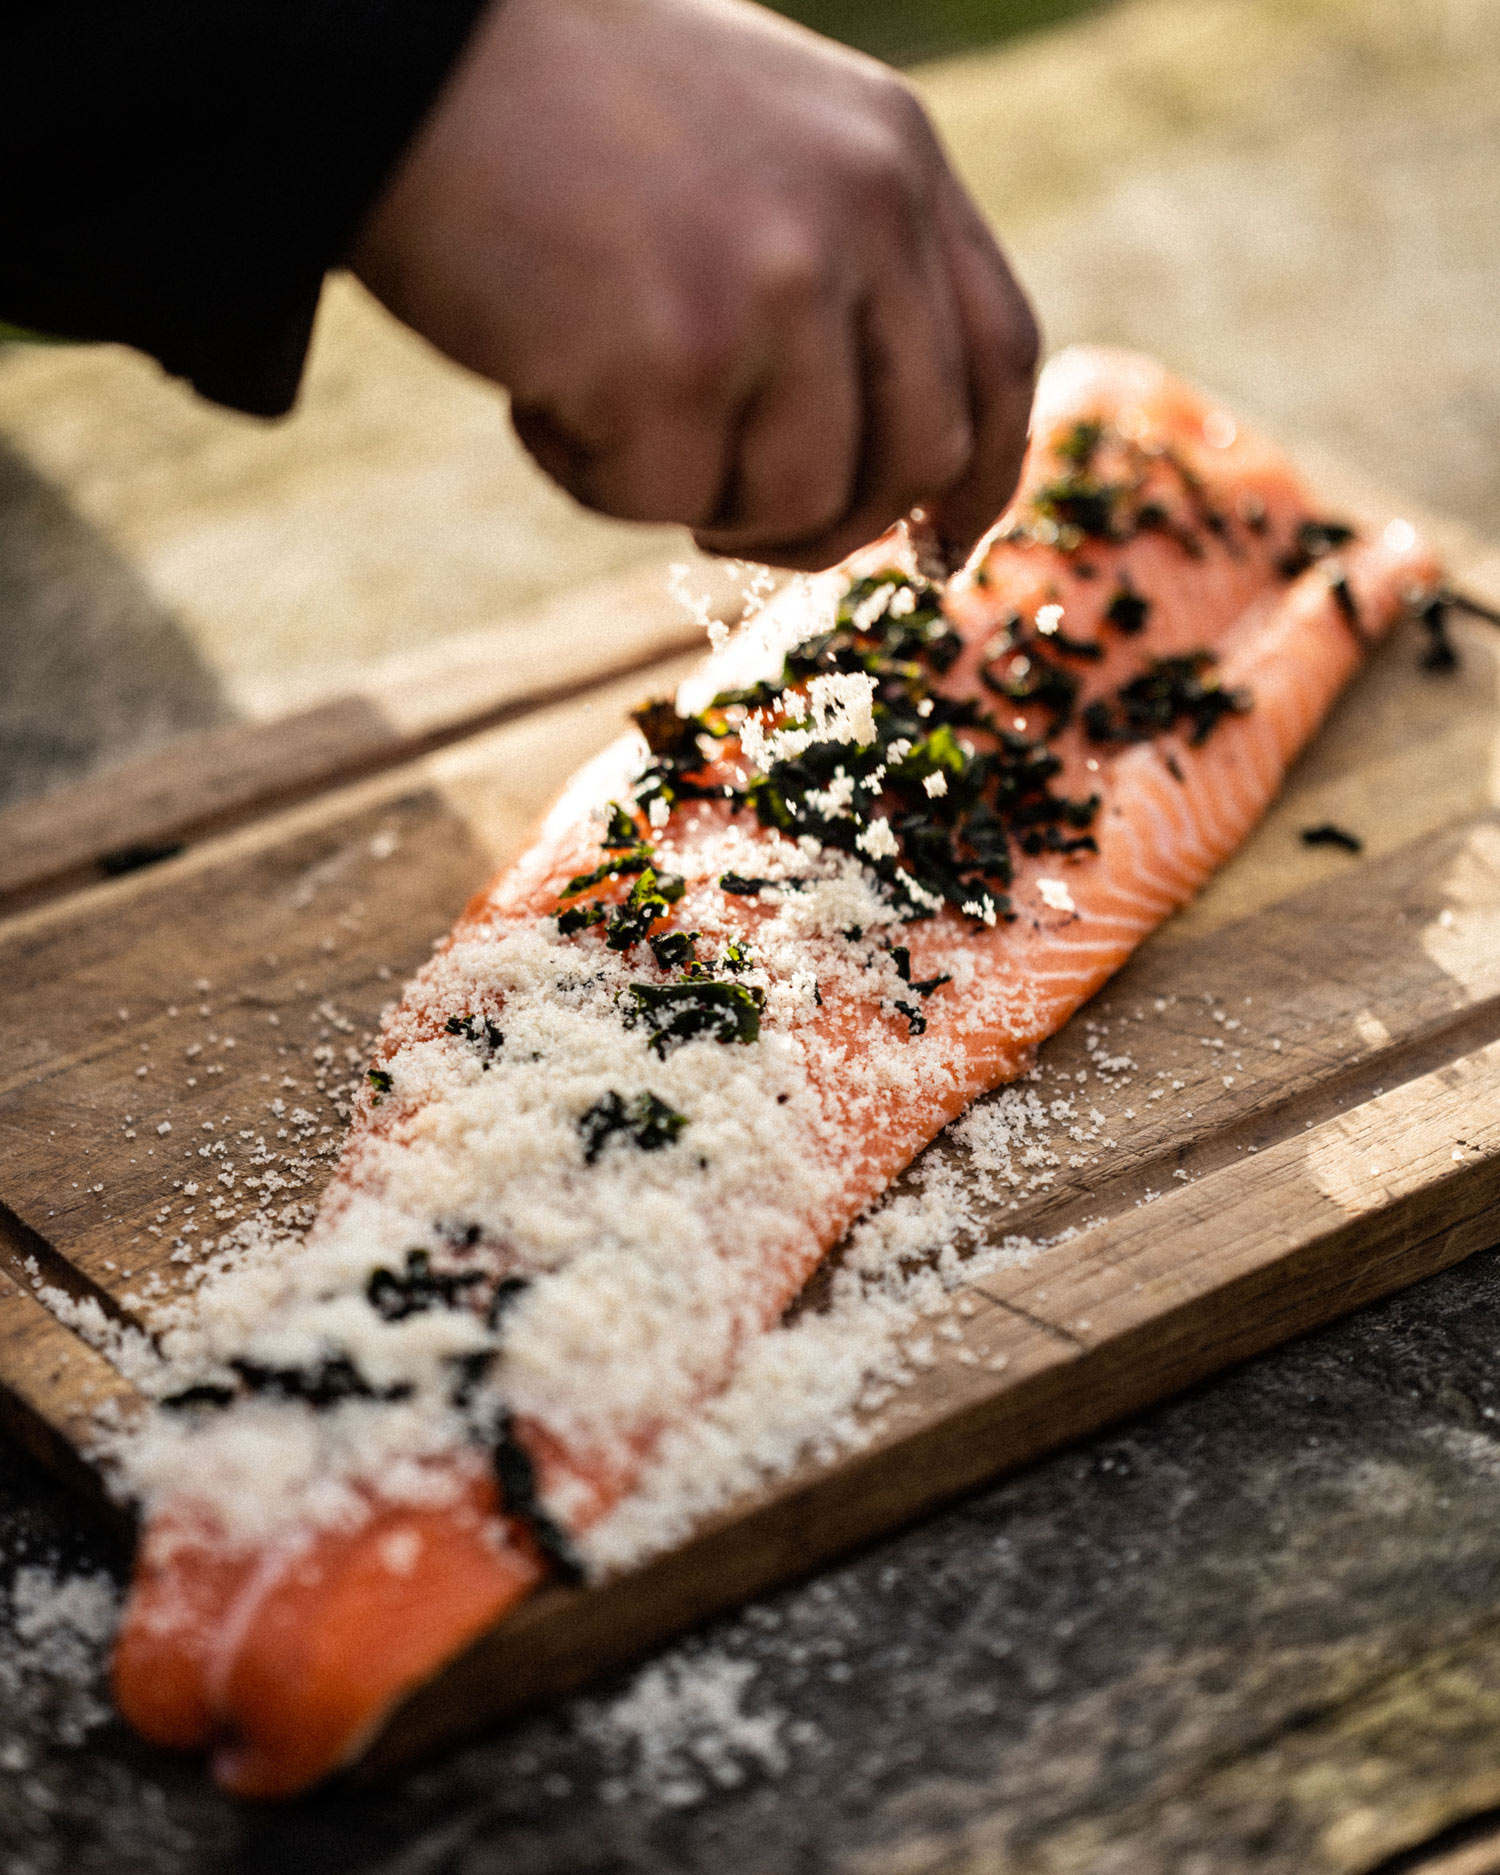 cover the salmon with the salt and seaweed mixture